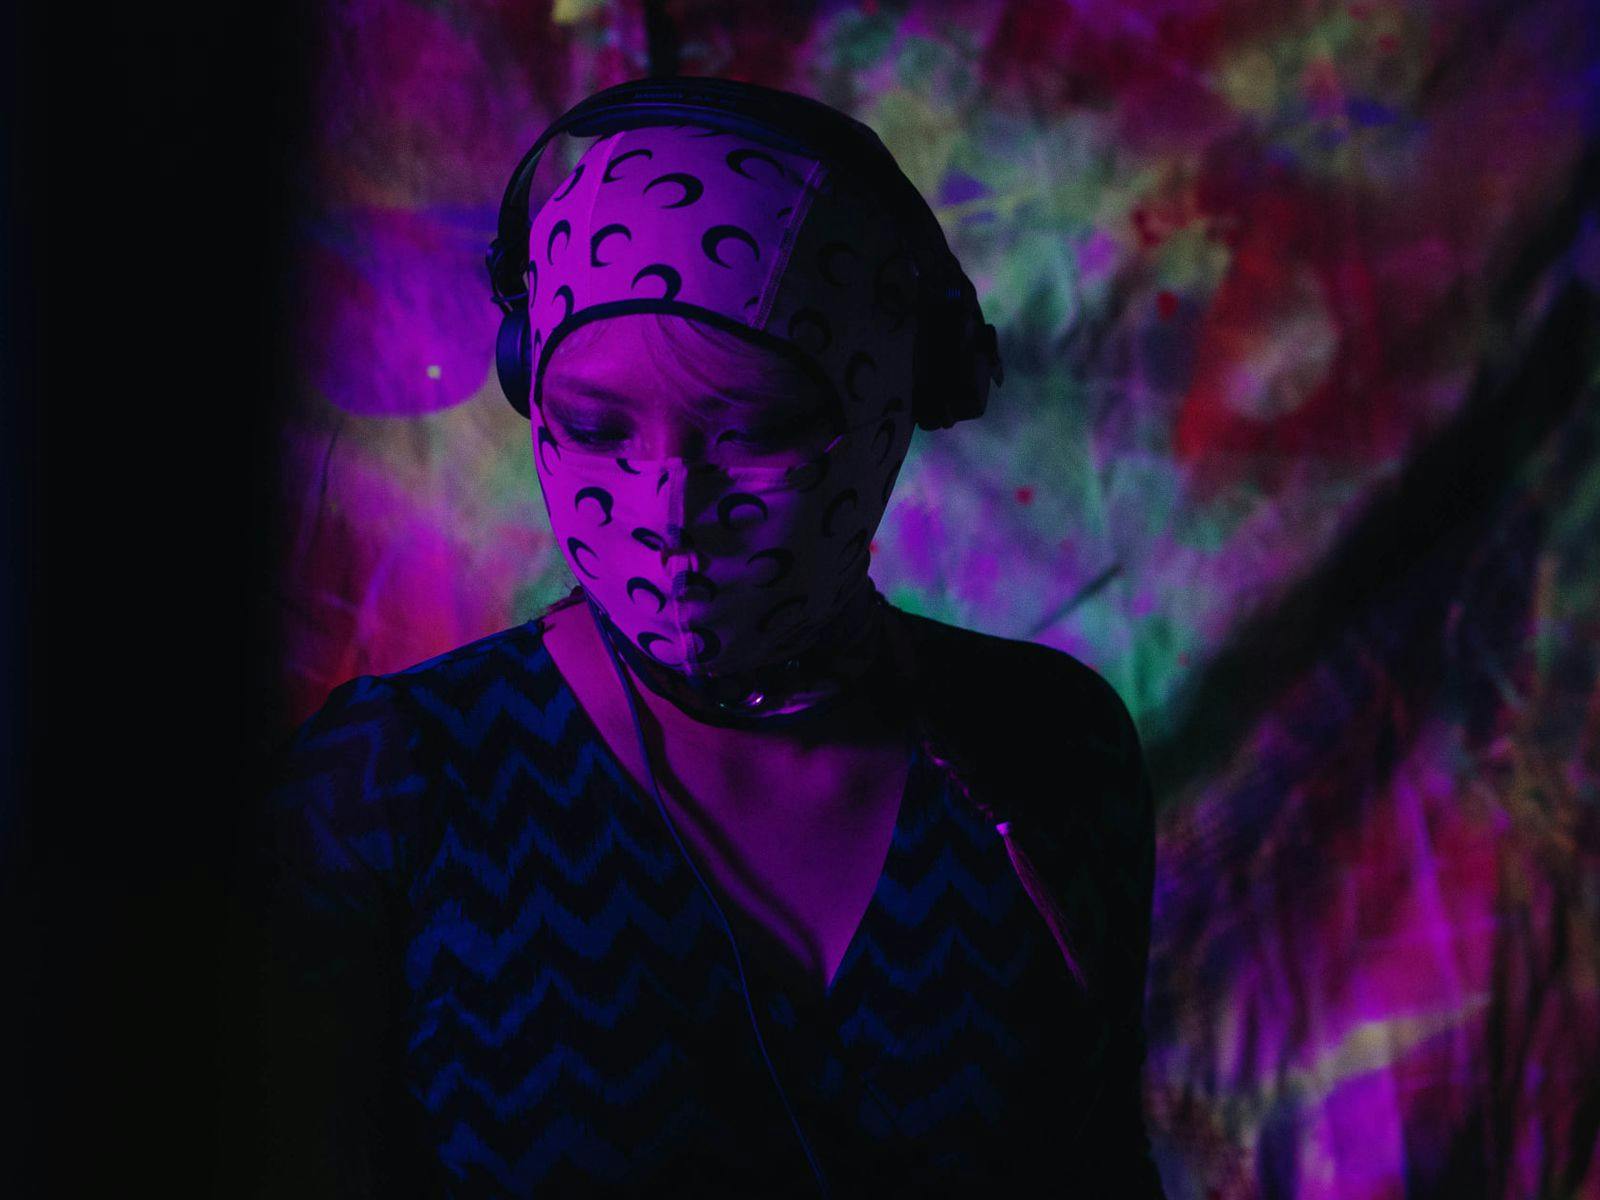 L$F in a dark, purple lit room wearing a hooded face covering.